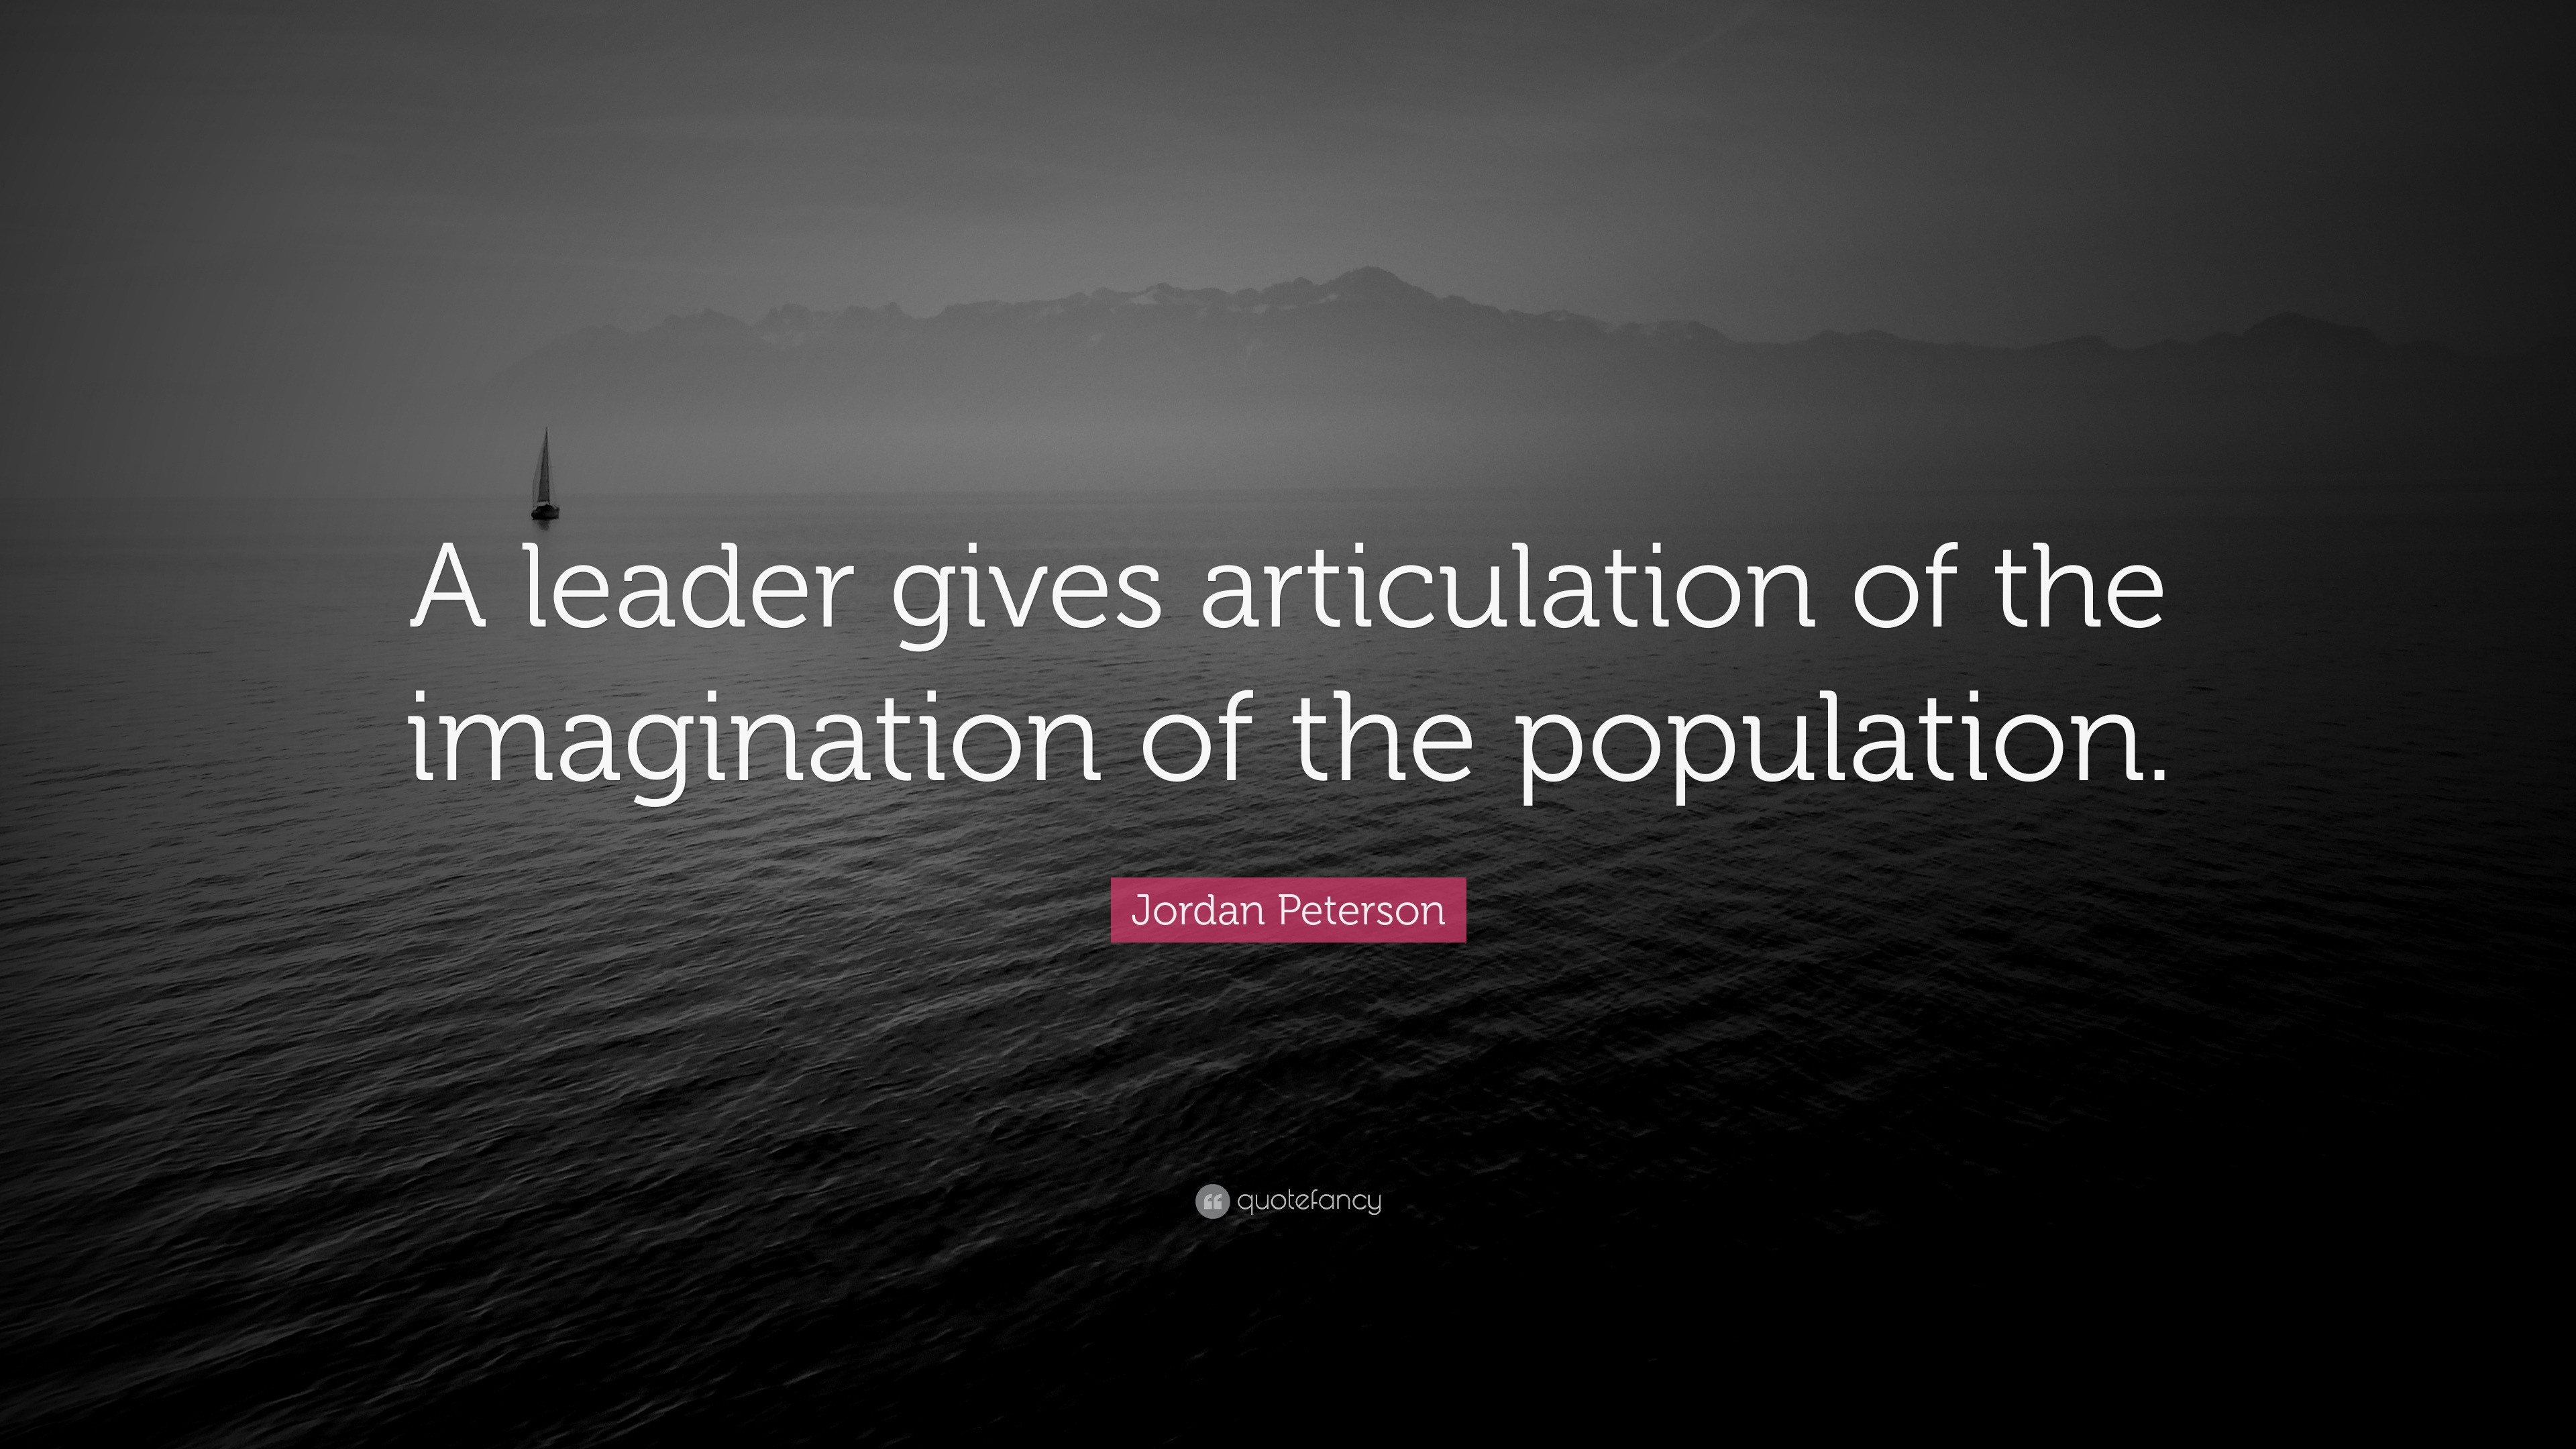 2001966 Jordan Peterson Quote A leader gives articulation of the